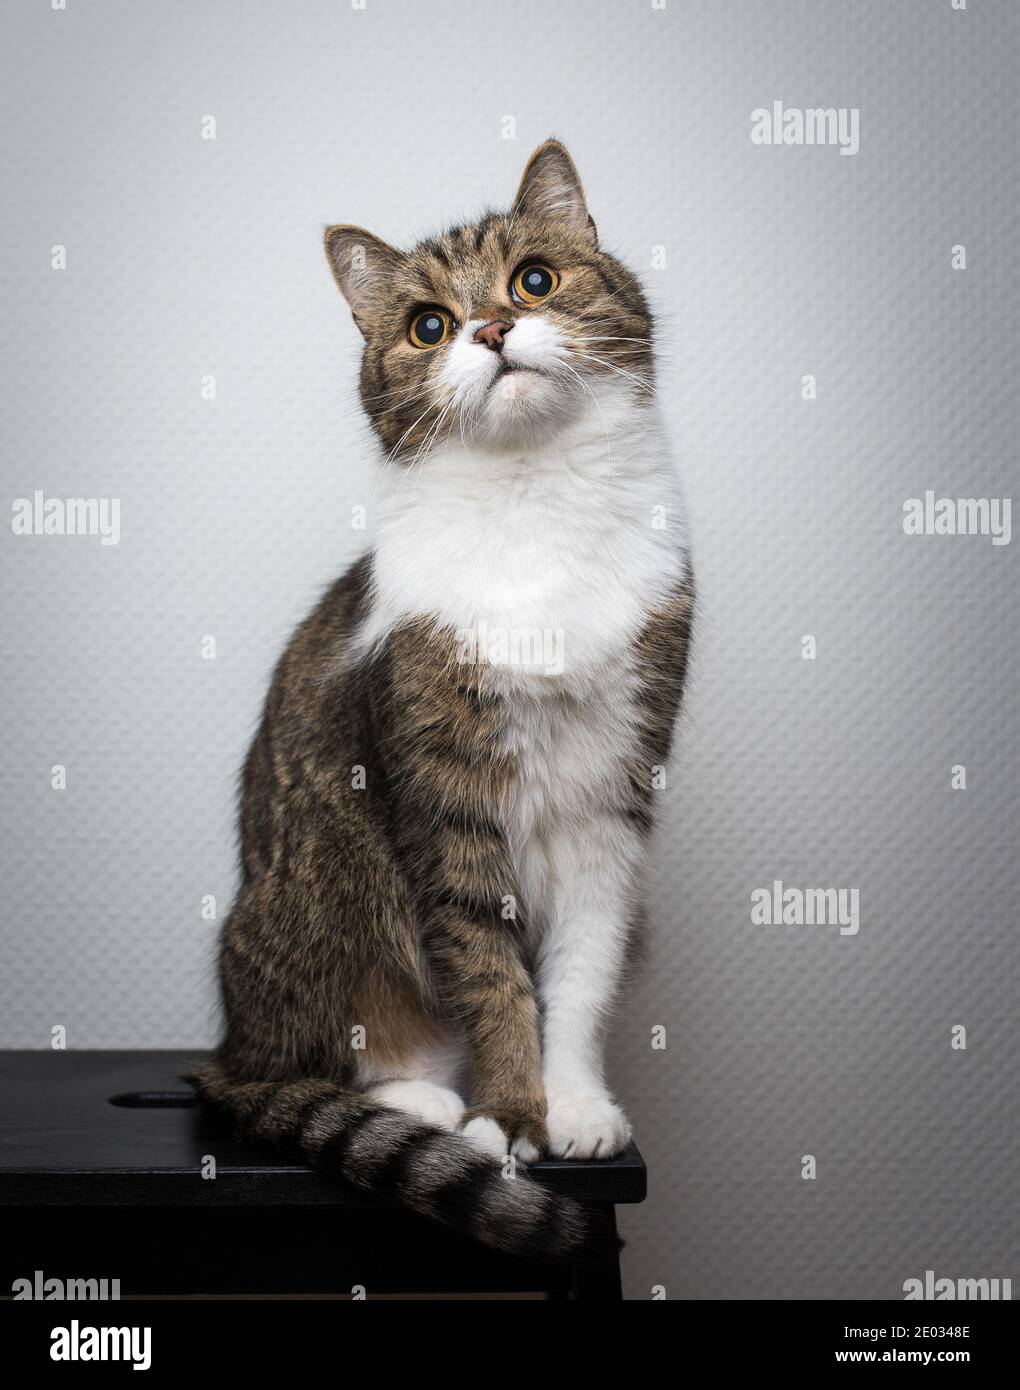 tabby british shorthair cat sitting on a black stool in front of white wall Stock Photo